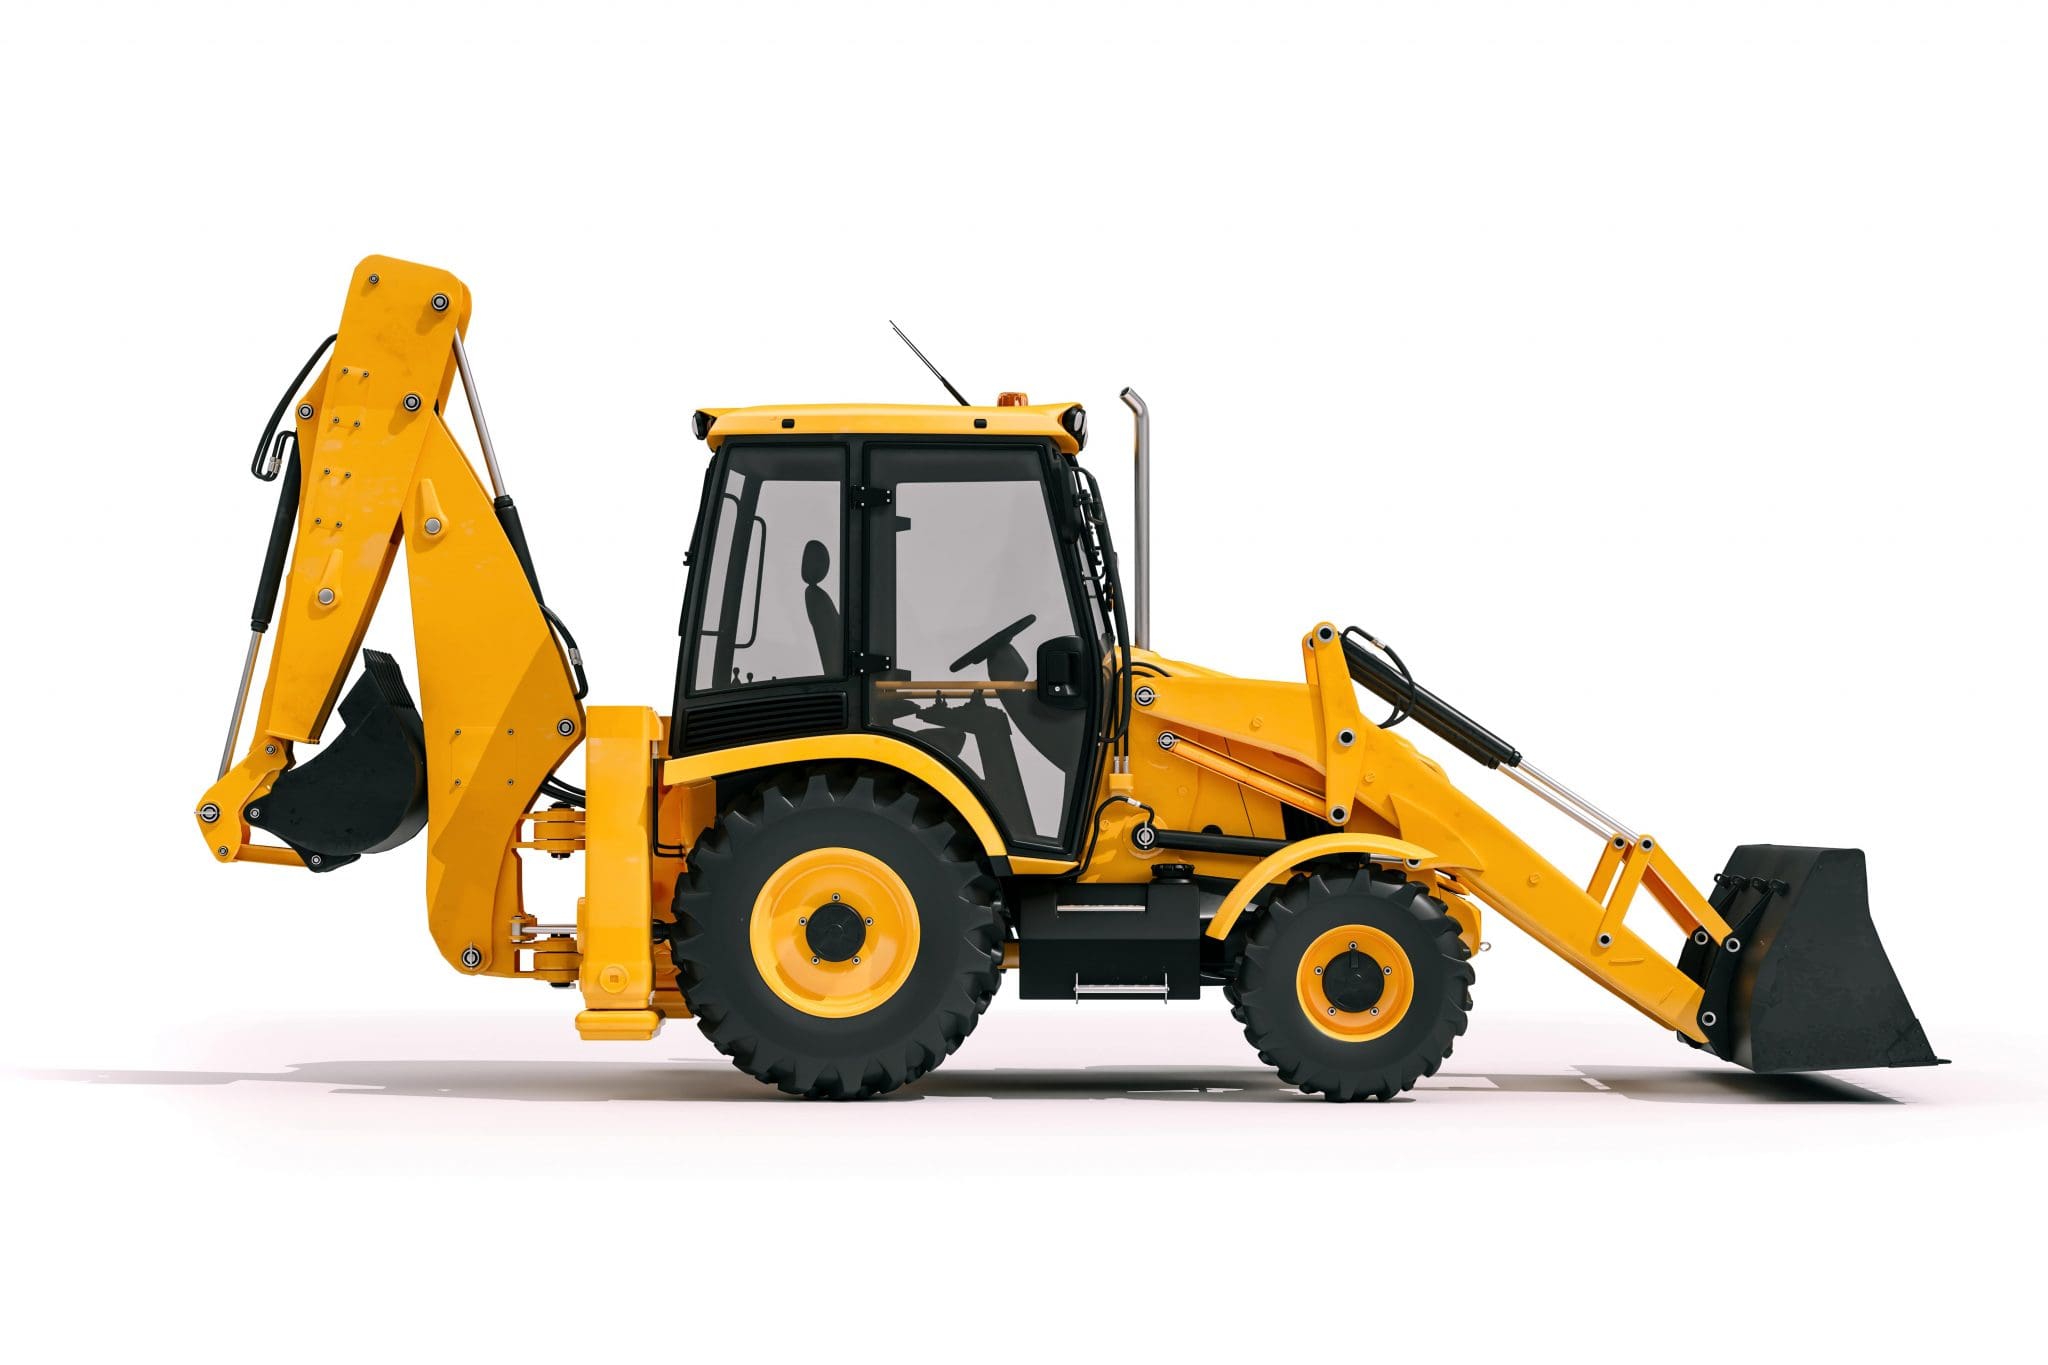 Backhoe: Parts and Functions